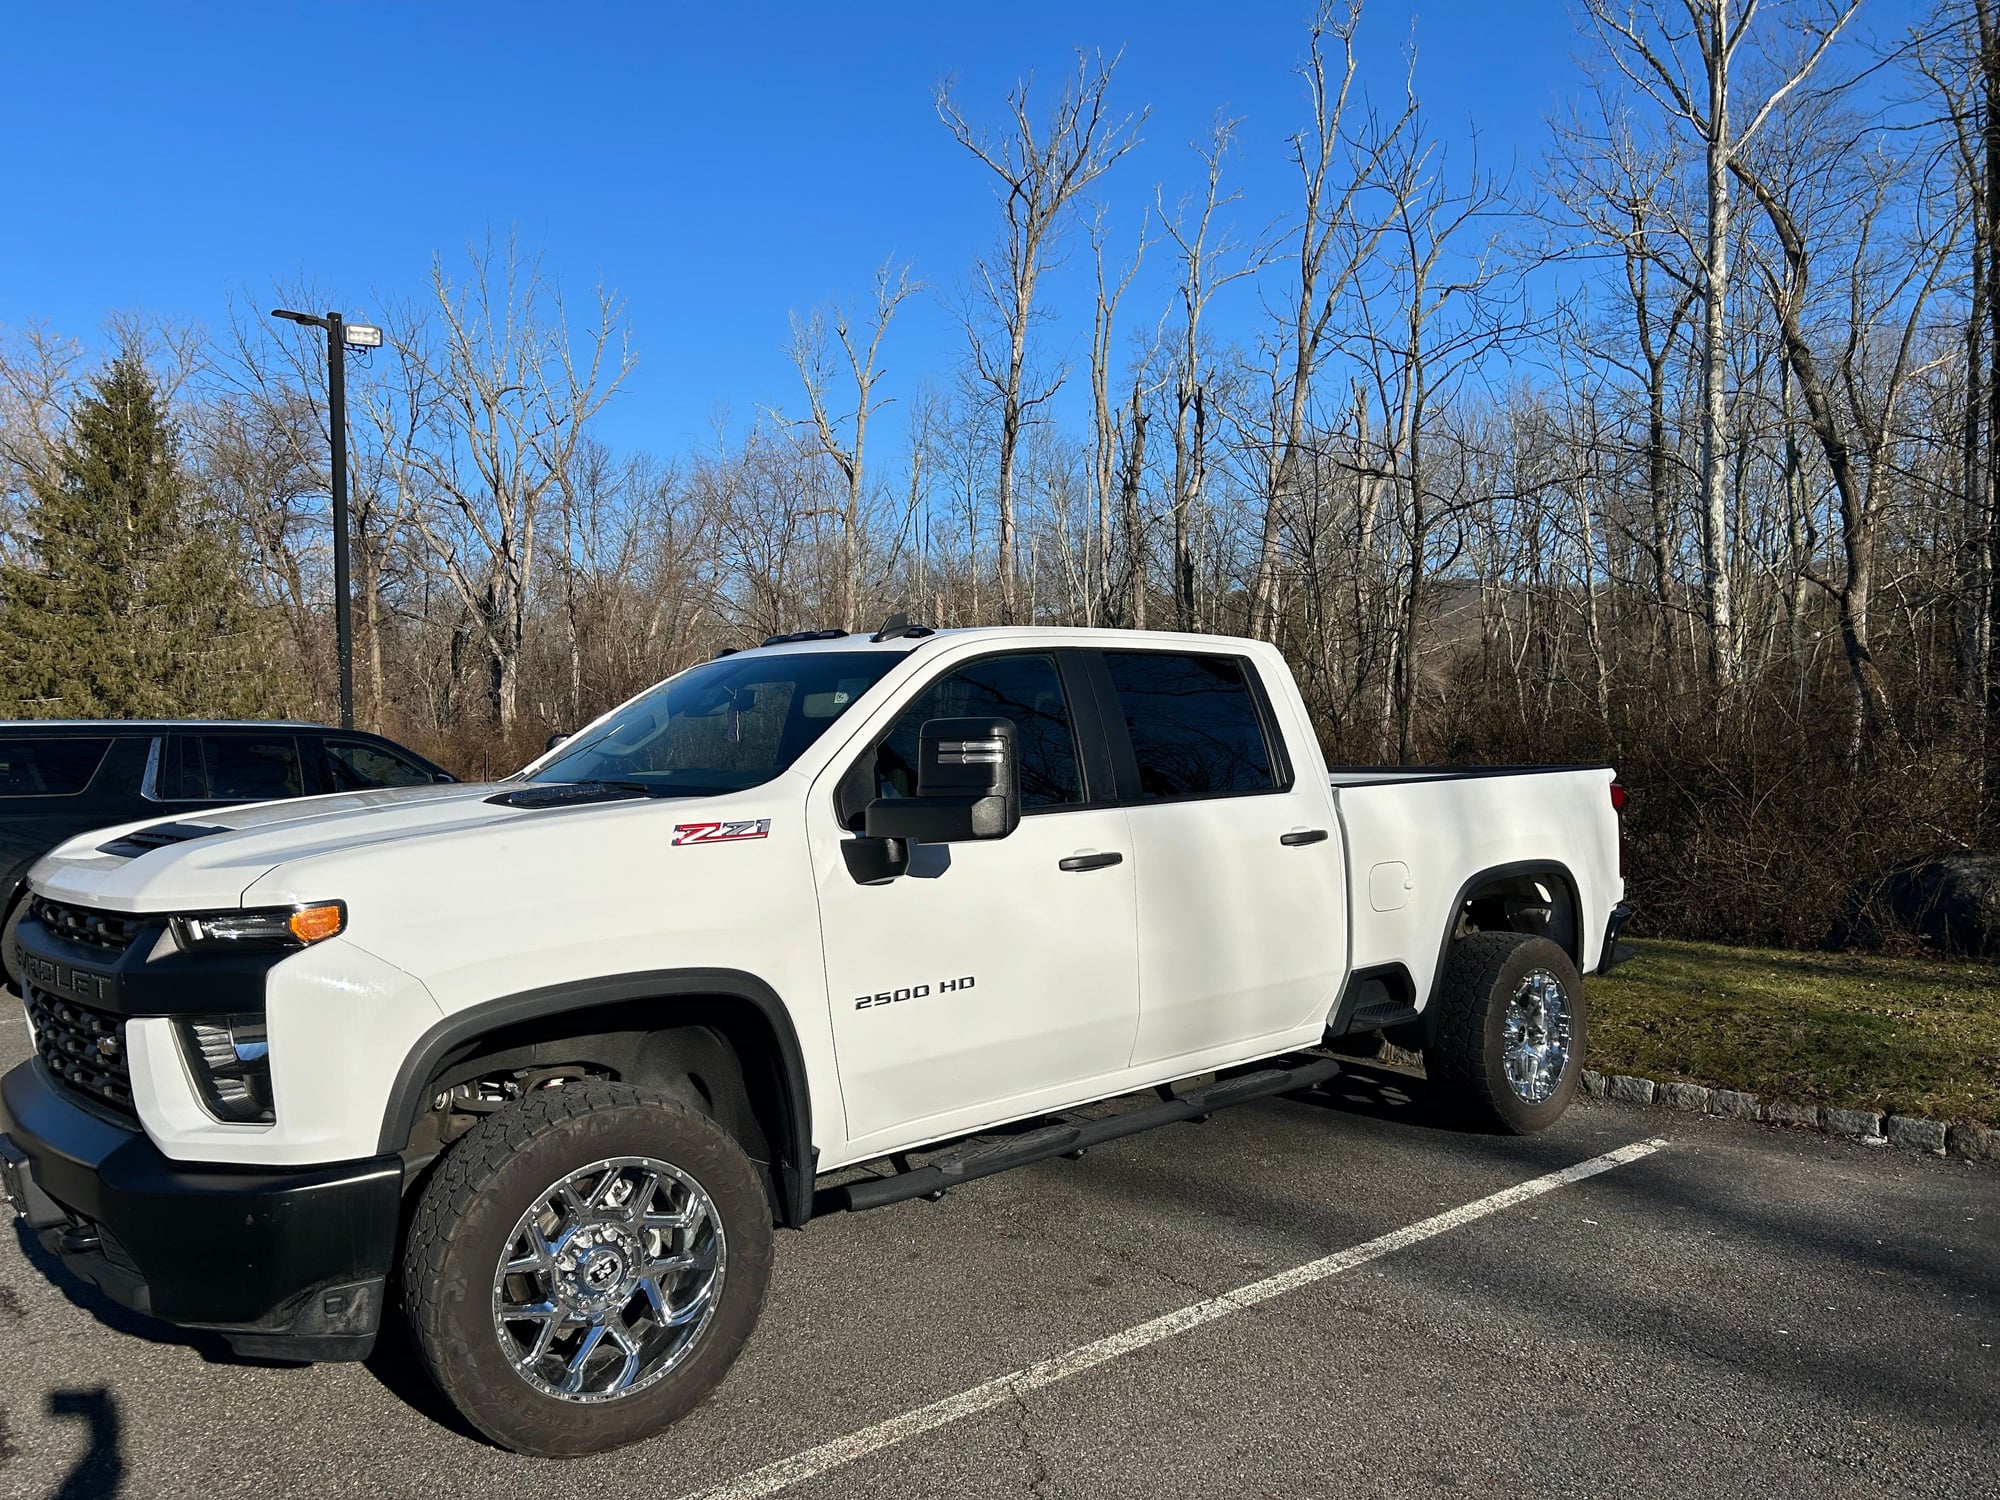 Wheels and Tires/Axles - 33/12.5/20 Rims with toyo - Used - 2011 to 2024 Chevrolet Silverado 2500 HD - Andover, NJ 07821, United States